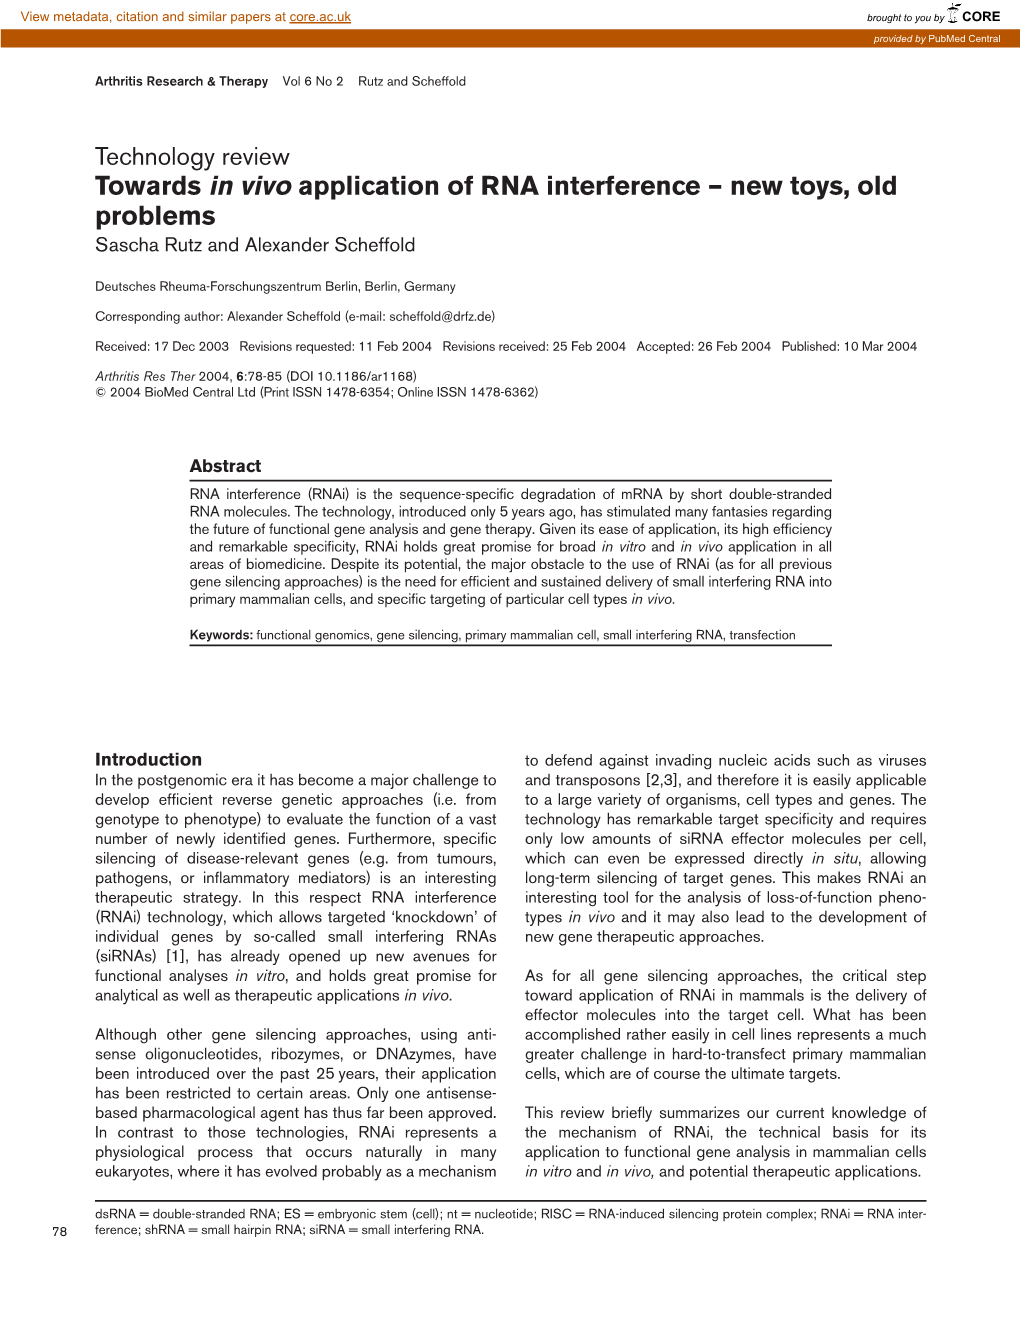 Towards in Vivo Application of RNA Interference – New Toys, Old Problems Sascha Rutz and Alexander Scheffold